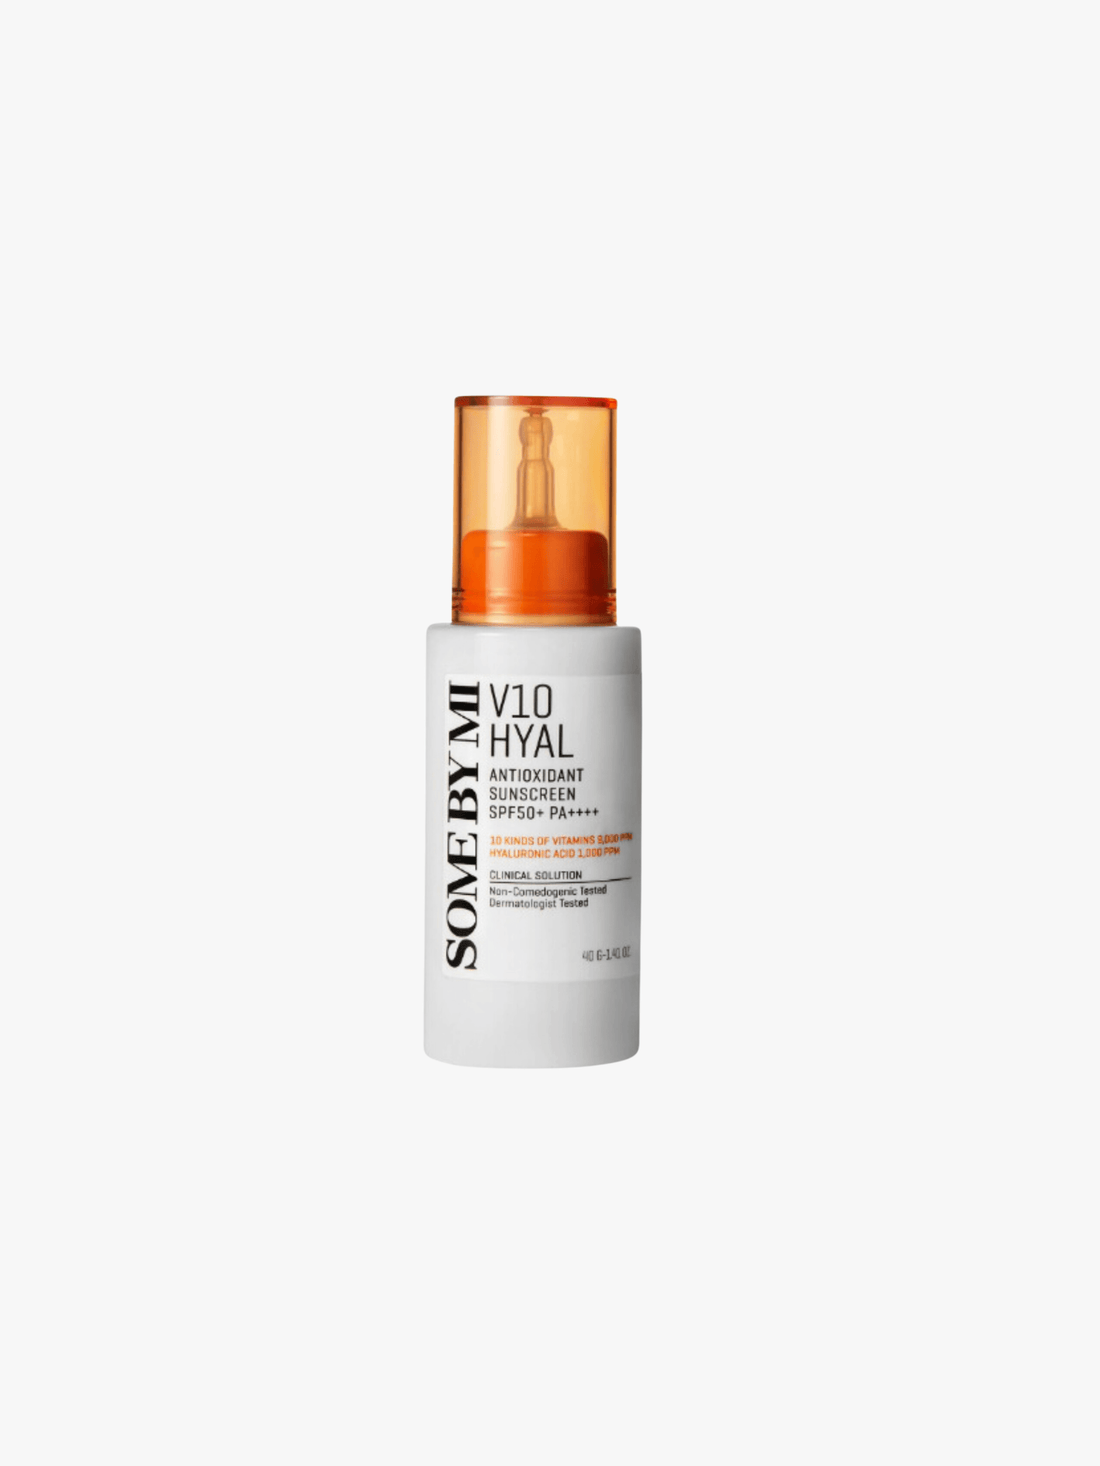 Some By Mi - Sun protection - V10 HYAL Antioxidant Sunscreen SPF50+